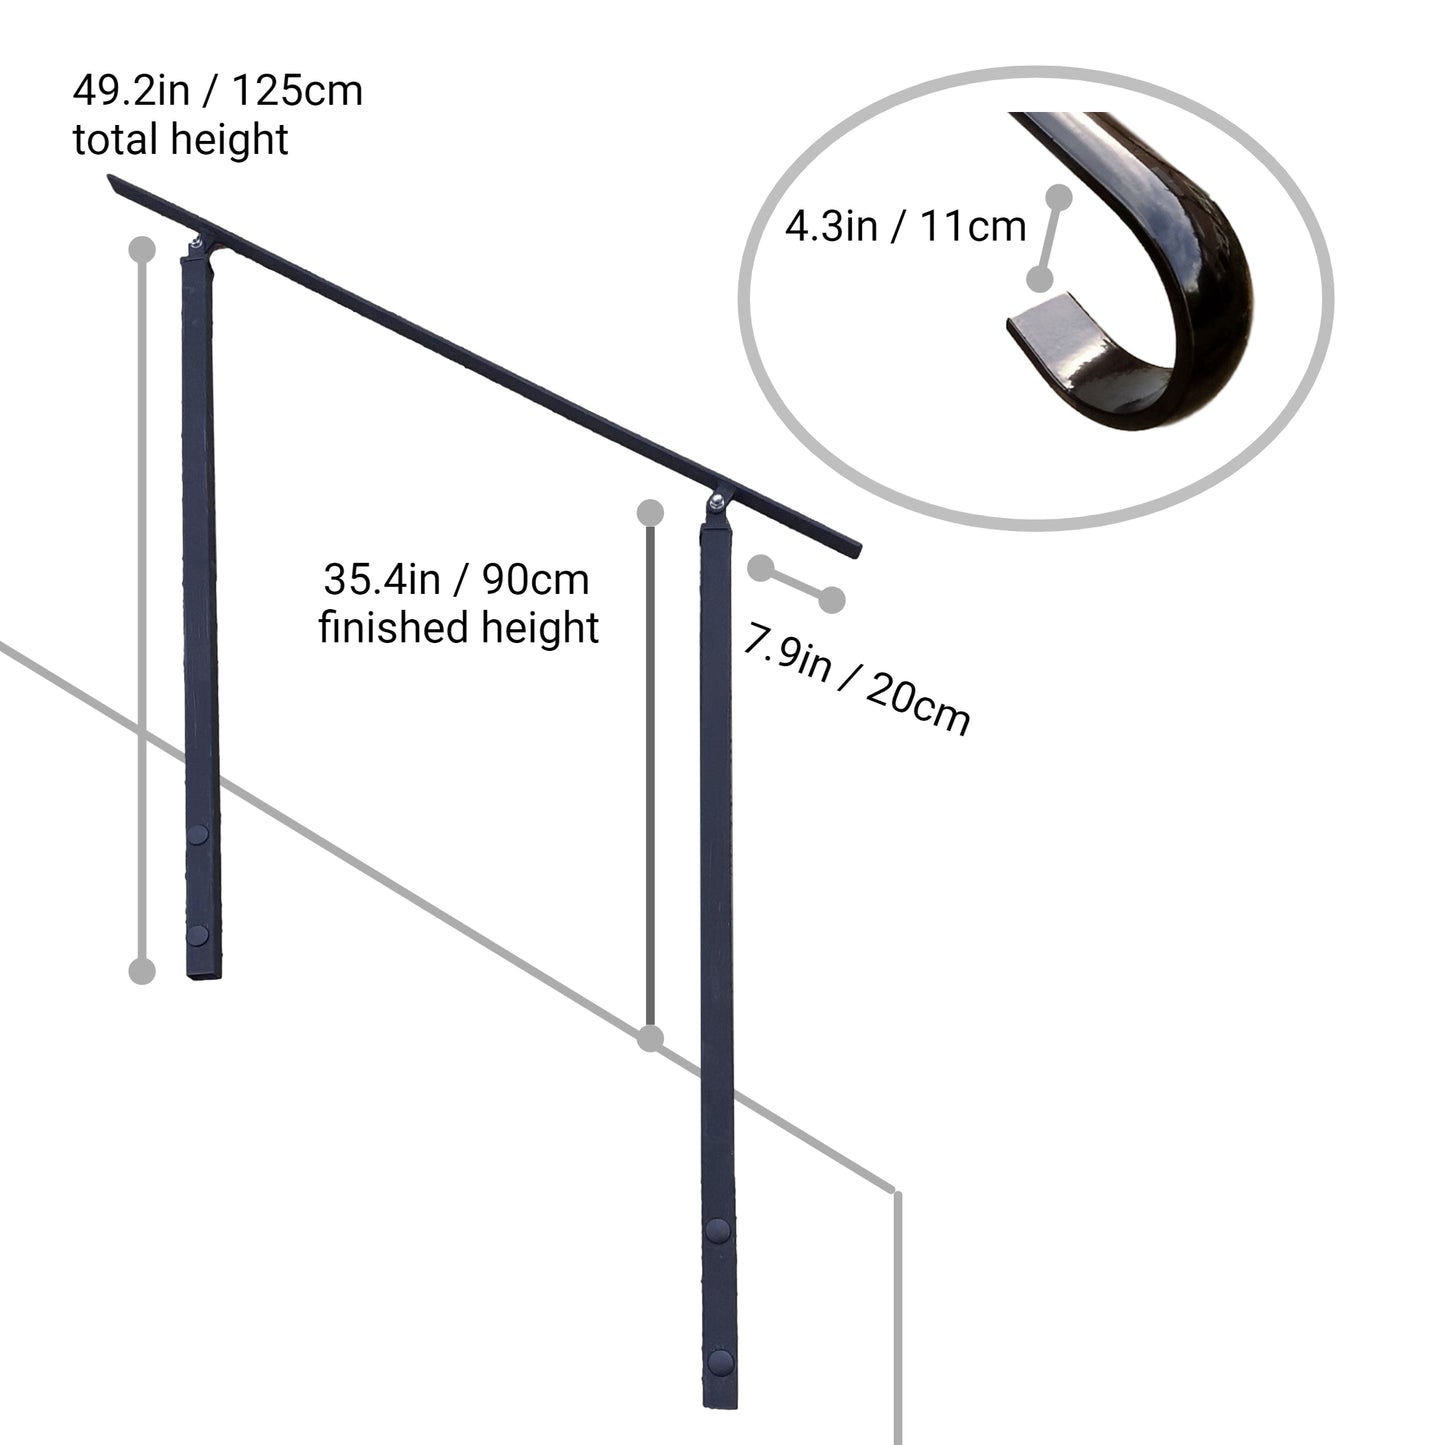 Wrought Iron Atara Handrail on Two Side Bolt Posts - 1m - 2.4m